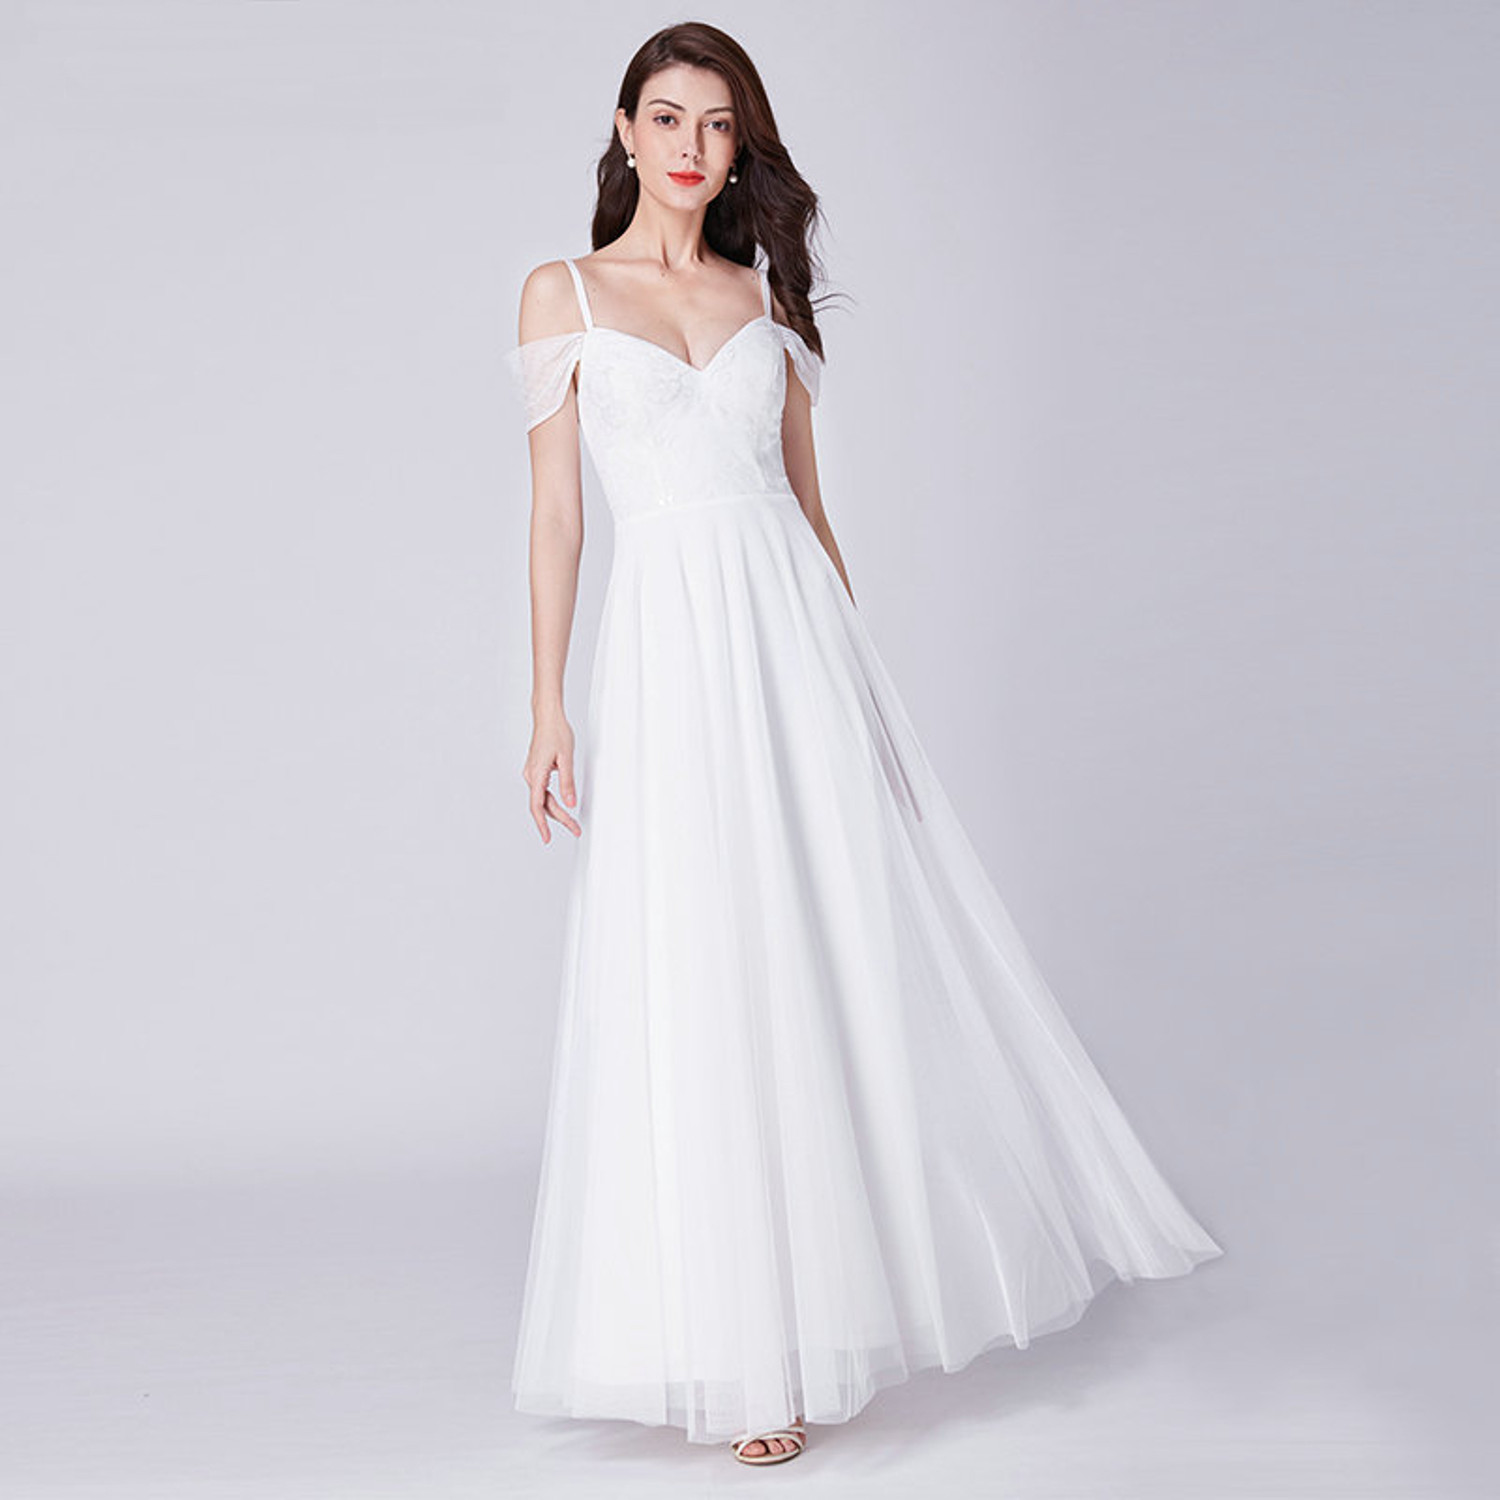 Wedding Dresses Casual
 How to Look Stylish and Beautiful in Casual Wedding